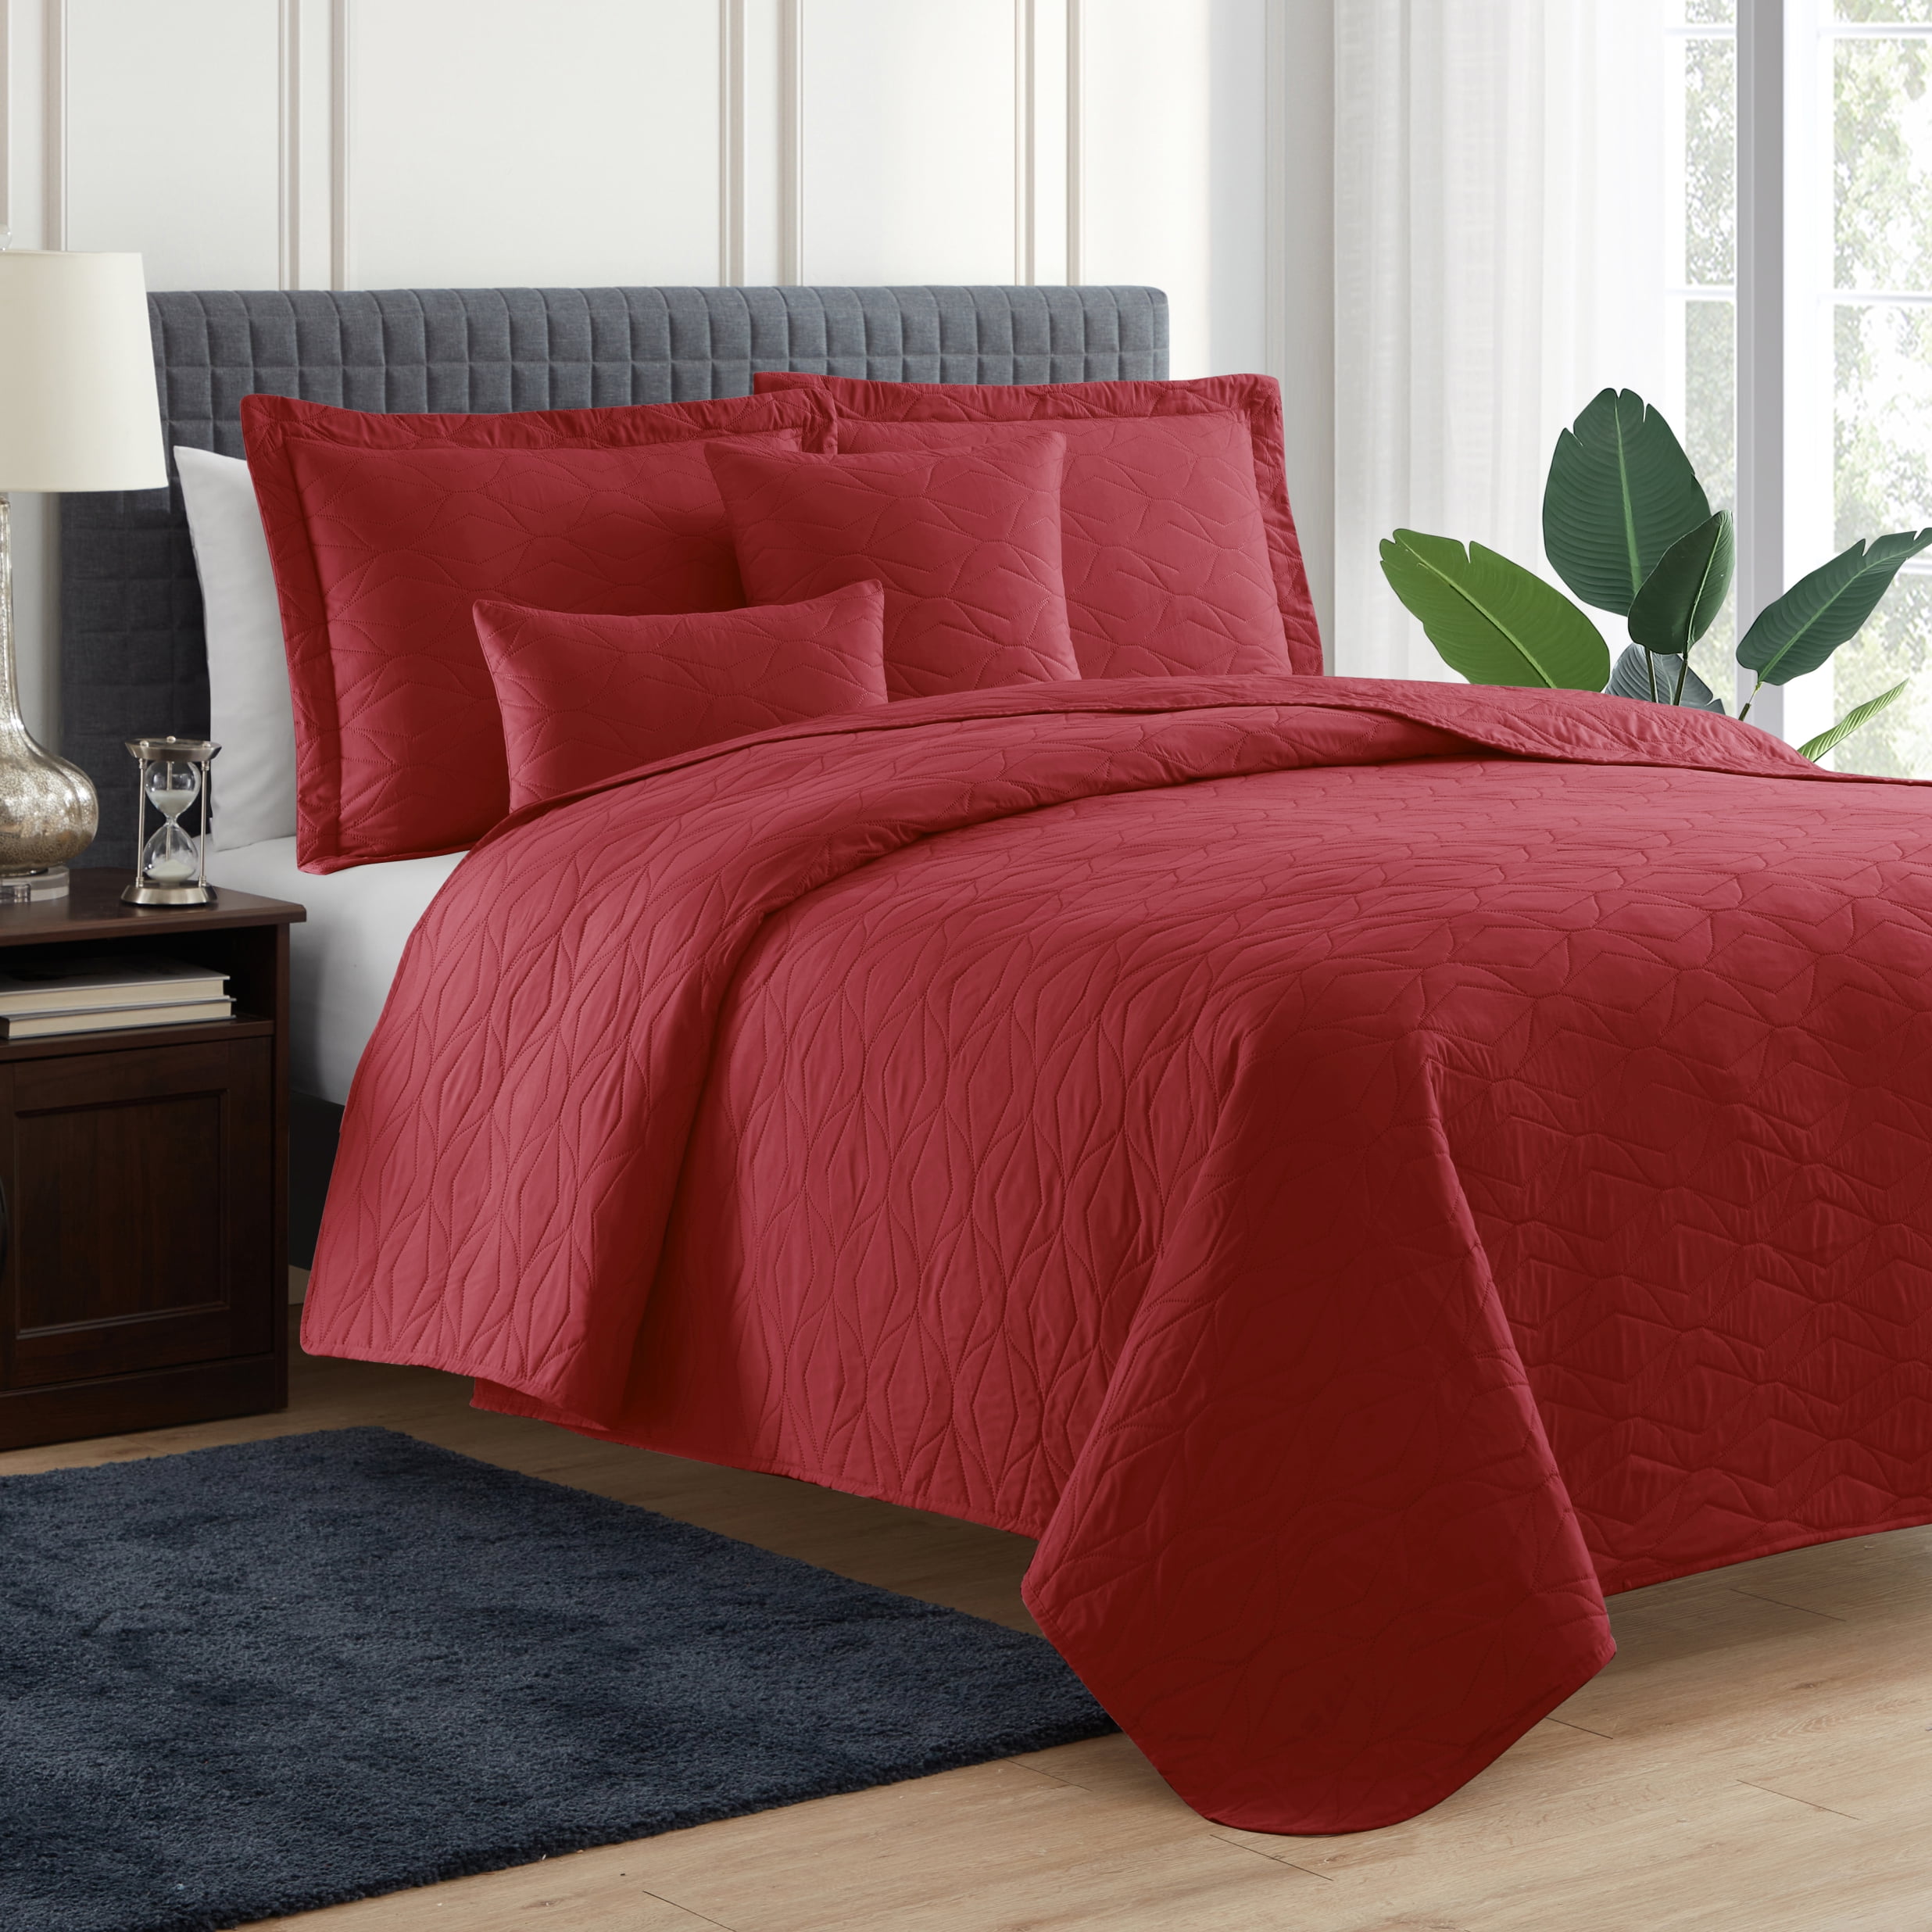 The Four Beautiful Sleeves of The Soft Yoga Rope The red and Black Nylon Bedspread are her/his Creative Gifts,